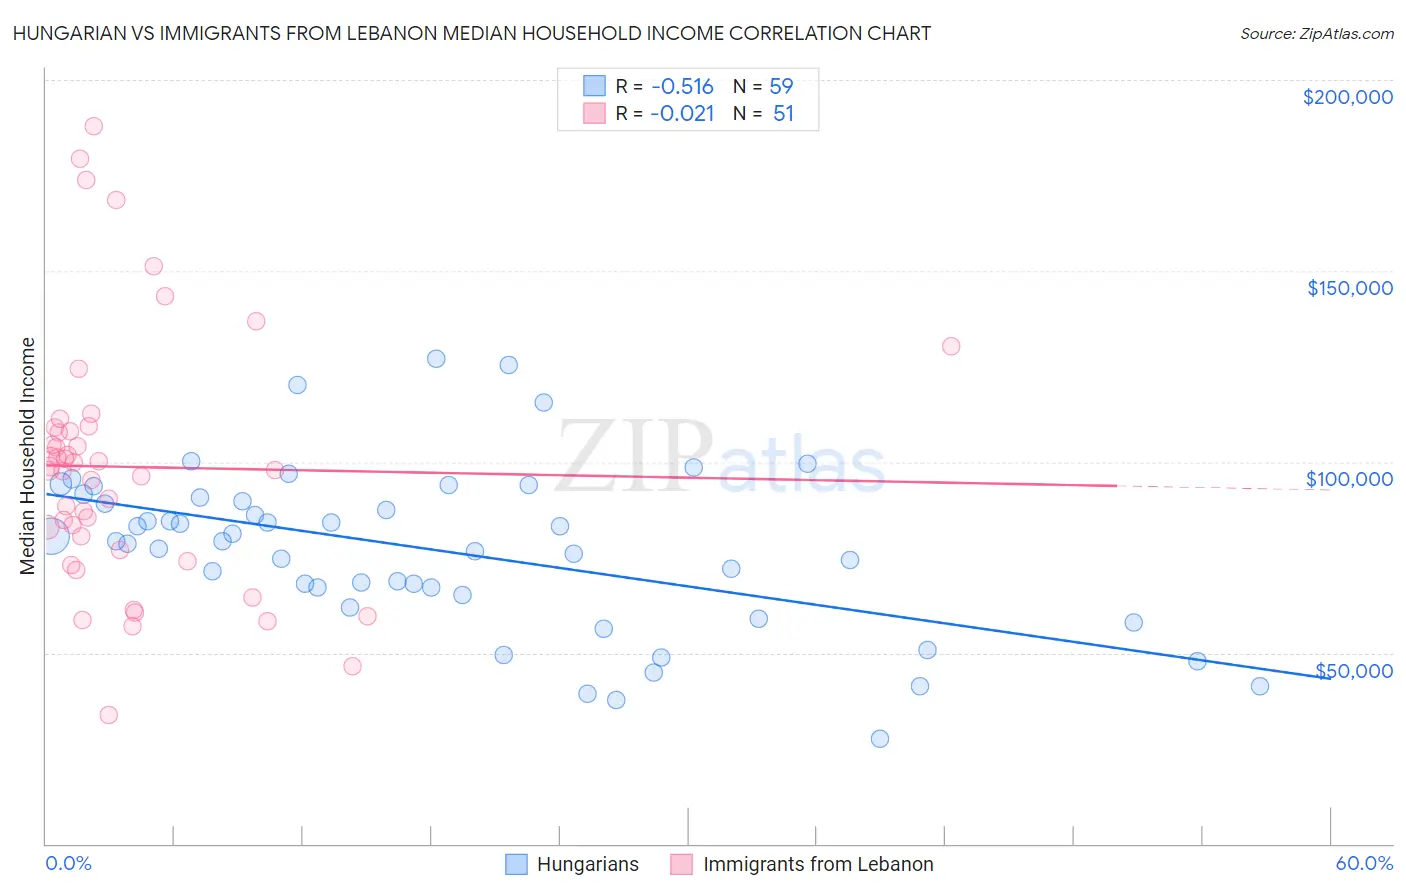 Hungarian vs Immigrants from Lebanon Median Household Income